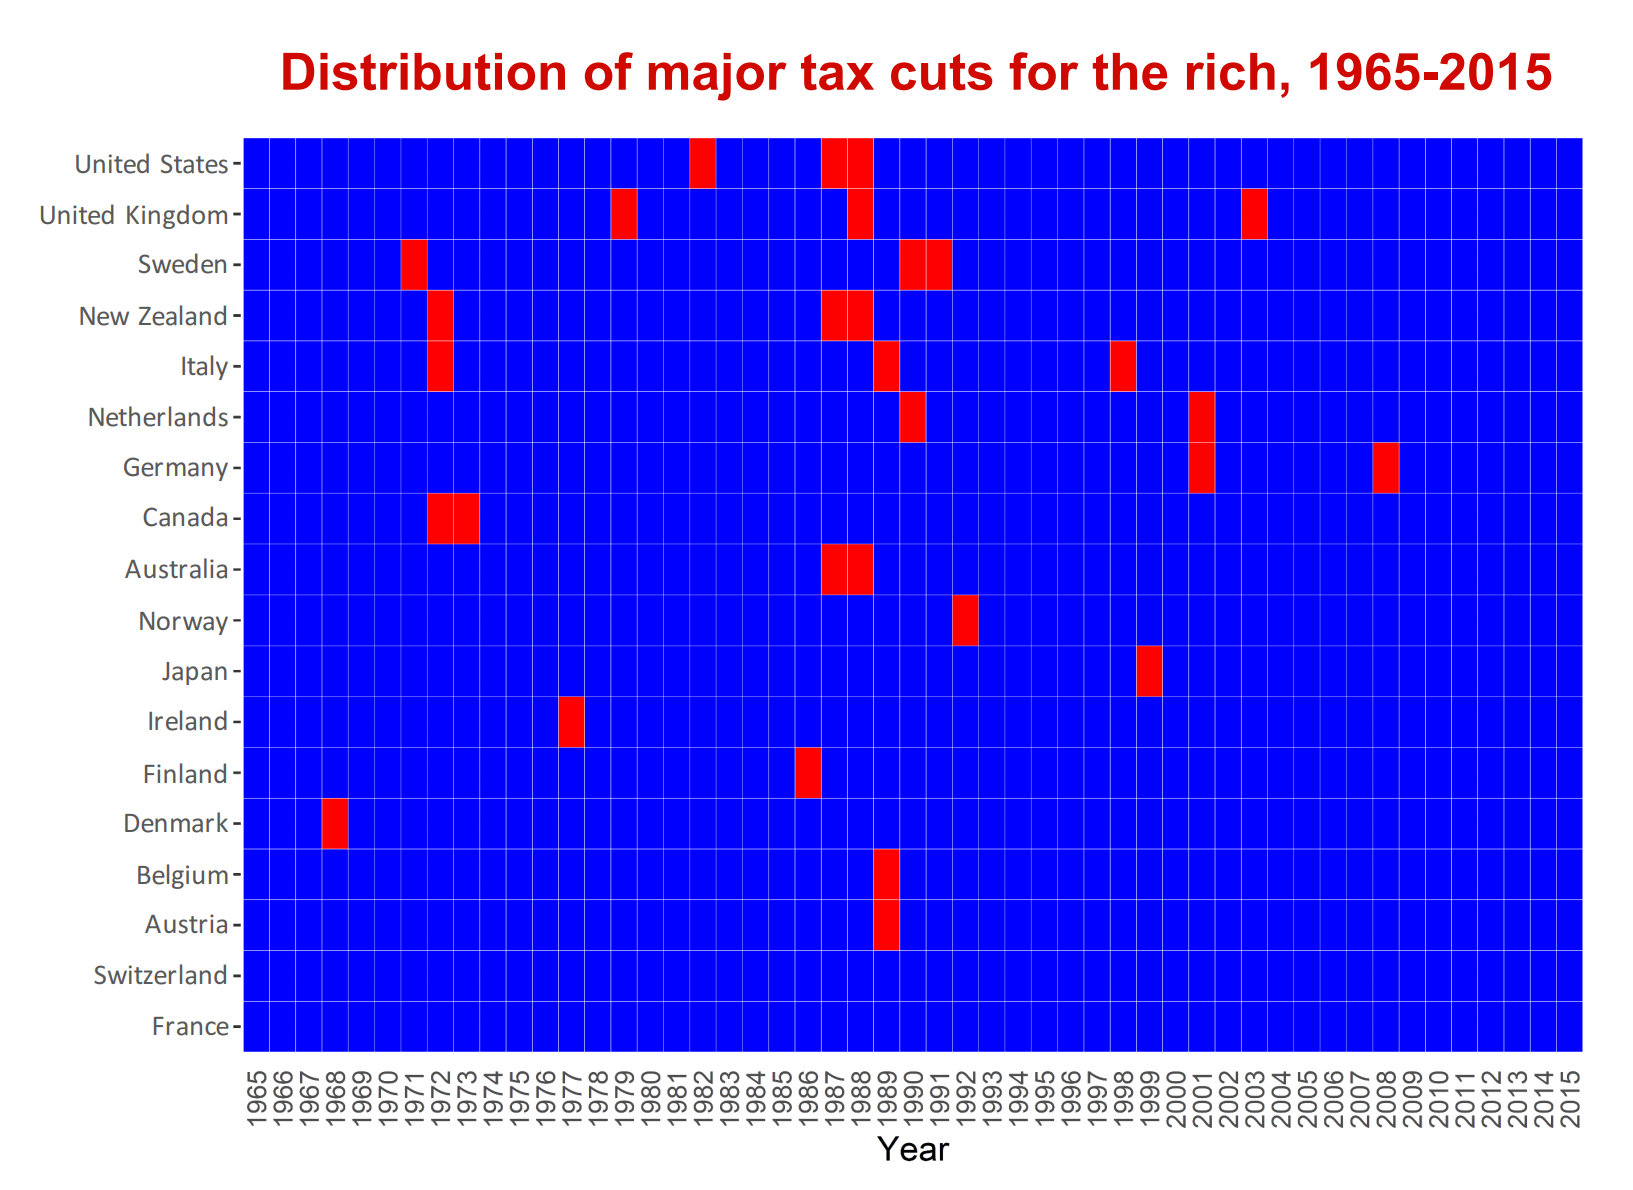 Distribution of major tax cuts for the rich across OECD nations, 1965-2015. This figure visualizes the resulting binary variable that picks out years in which taxes on the rich were reduced substantially. In total, we identify 30 country-year observations where taxes on the rich were significantly reduced. Governments enacted major tax reforms in all countries in our sample and across the whole observation period. Many countries implemented major tax cuts for the rich in the late 1980s. Furthermore, the identification of tax cuts is also in line with previous studies that have focused on income tax progressivity (Rubolino and Waldenström, 2020) or on overall tax progressivity single specific countries (Saez and Zucman, 2019). For instance, echoing these authors’ findings, we find two major reforms that reduced taxes on the rich in the US: 1982 (First Reagan Tax Cut) and 1986/1987 (Second Reagan Tax Cut). Graphic: Hope and Limberg, 2020 / LSE